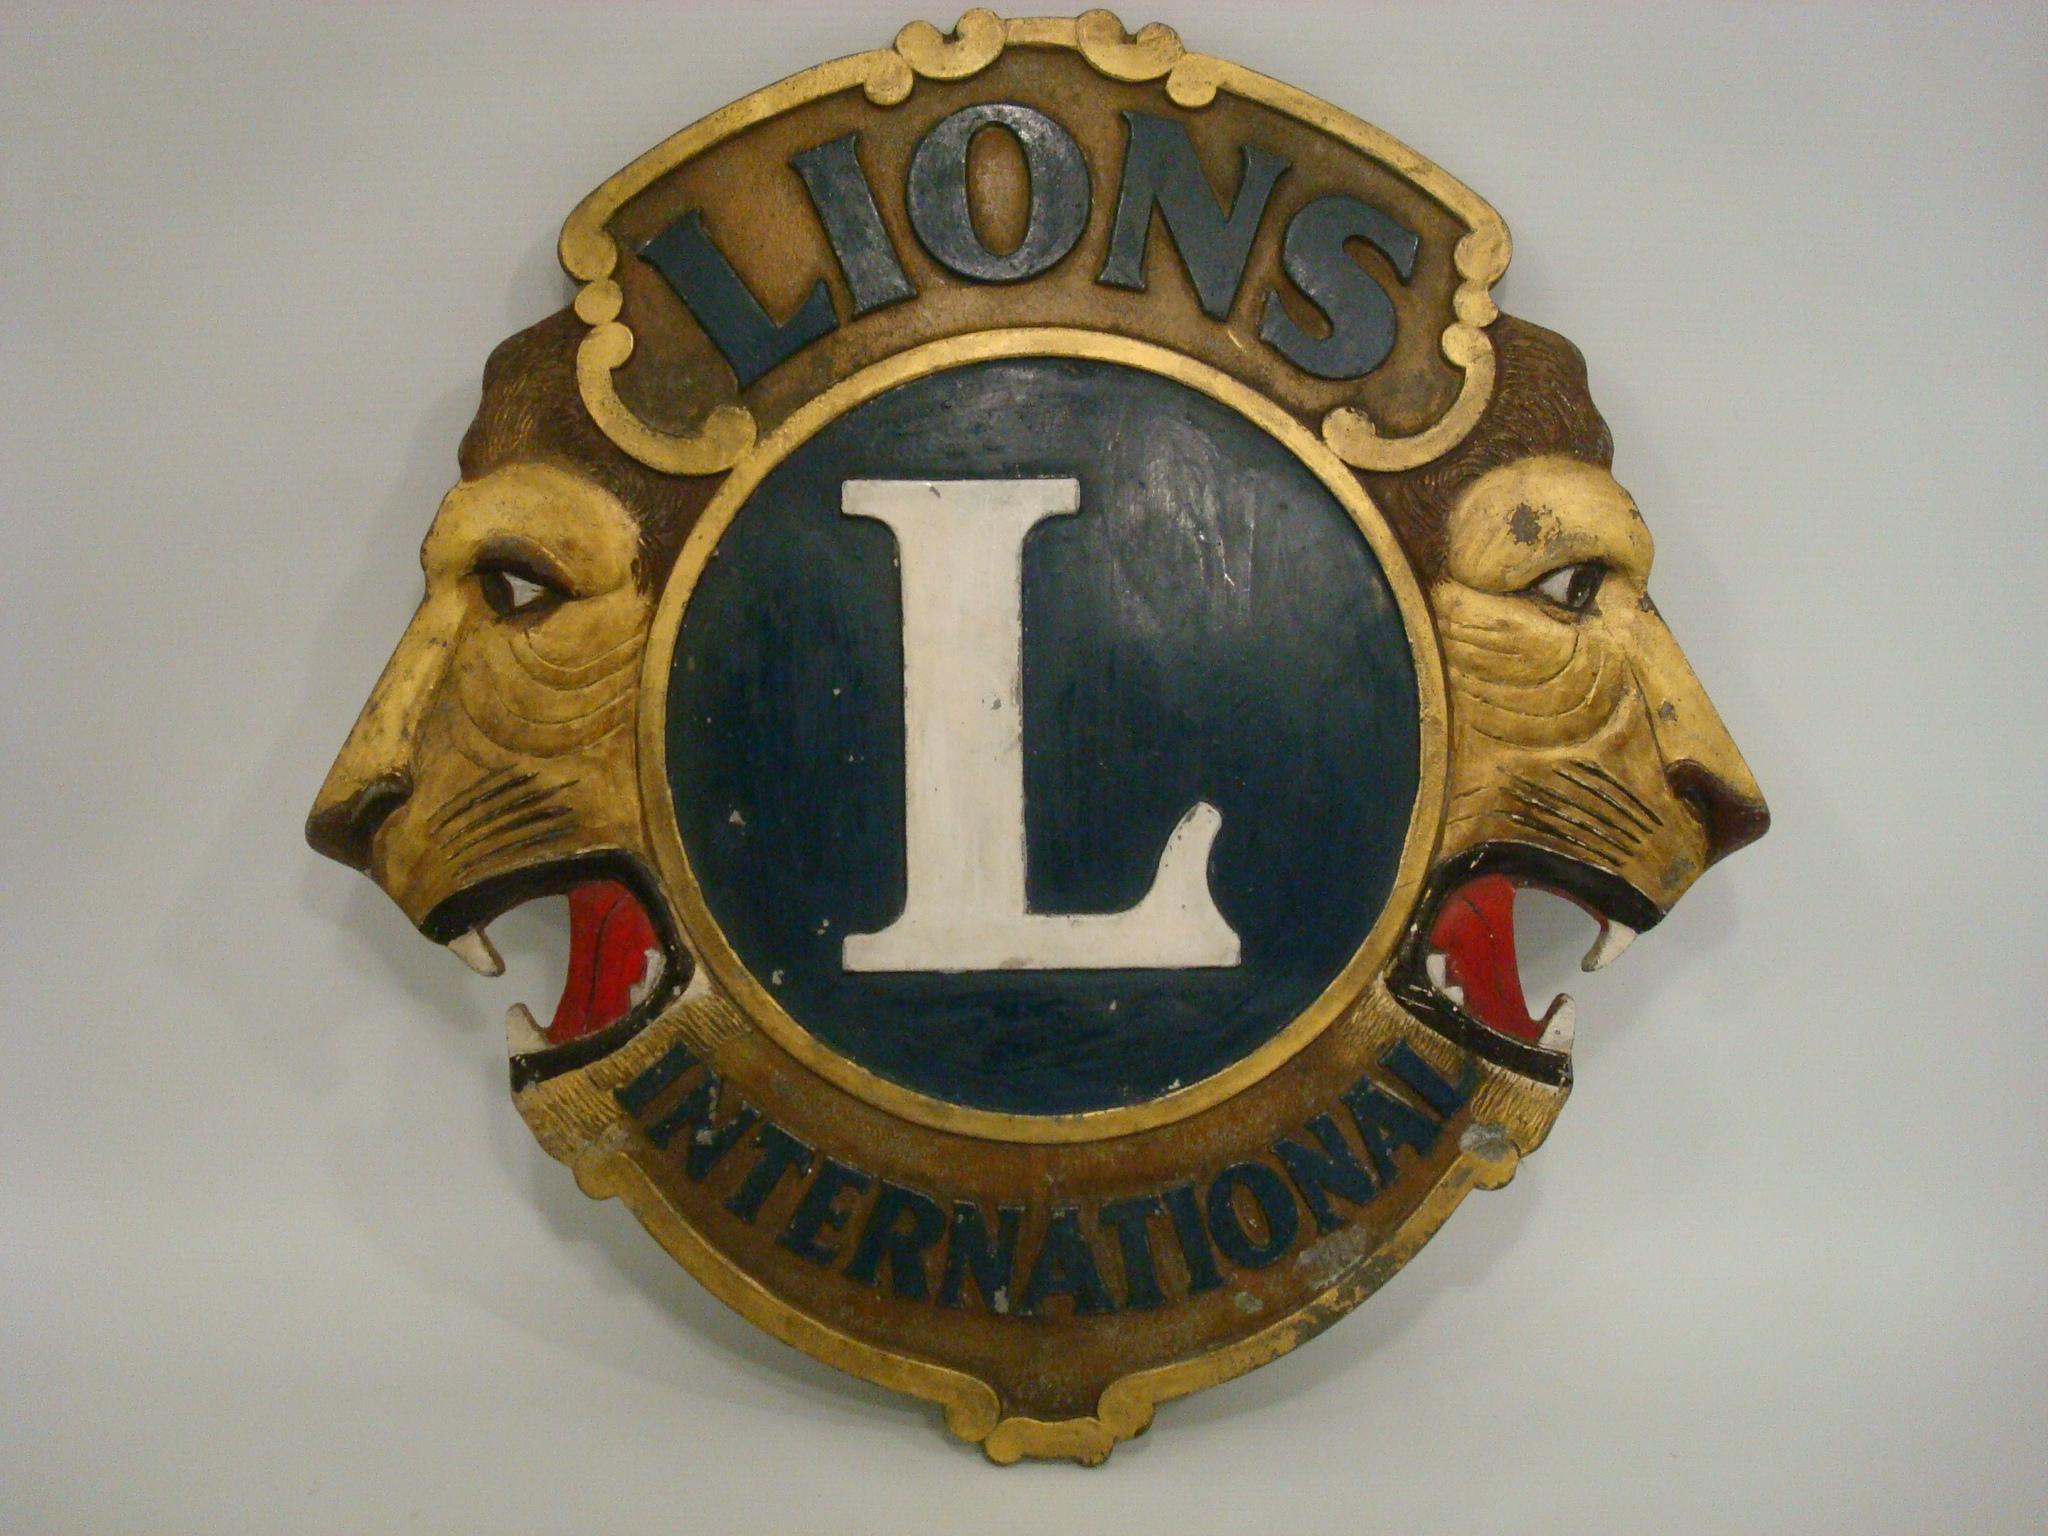 Vintage Antique Lion´s Club International Plaque / Sign with mostly original hand paint. It has some age wear, but overall very good conditions. 
Vintage Lions Club International metal plaque. This is in overall good vintage condition. Sign is